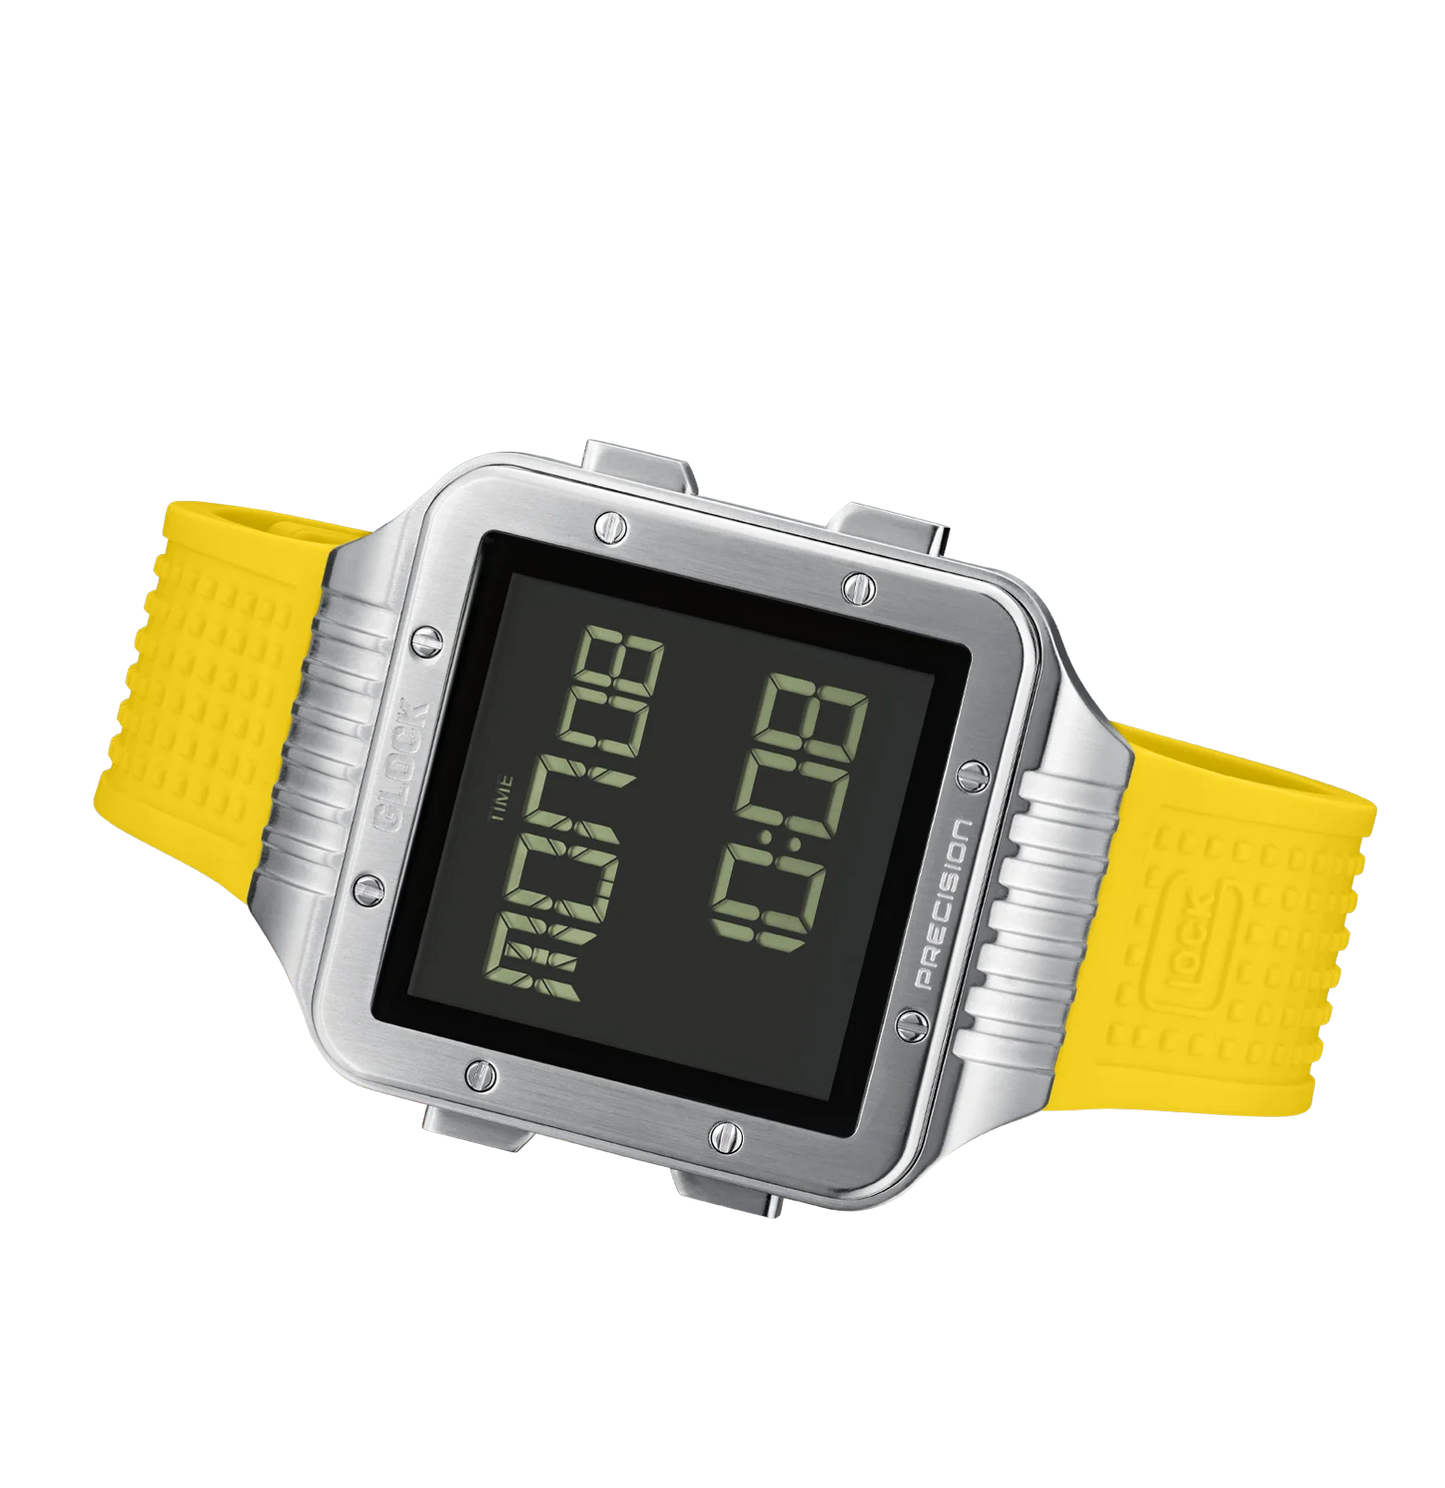 Men's Glock Digital Watch with Silver Rectangle Face & Yellow Silicone Band